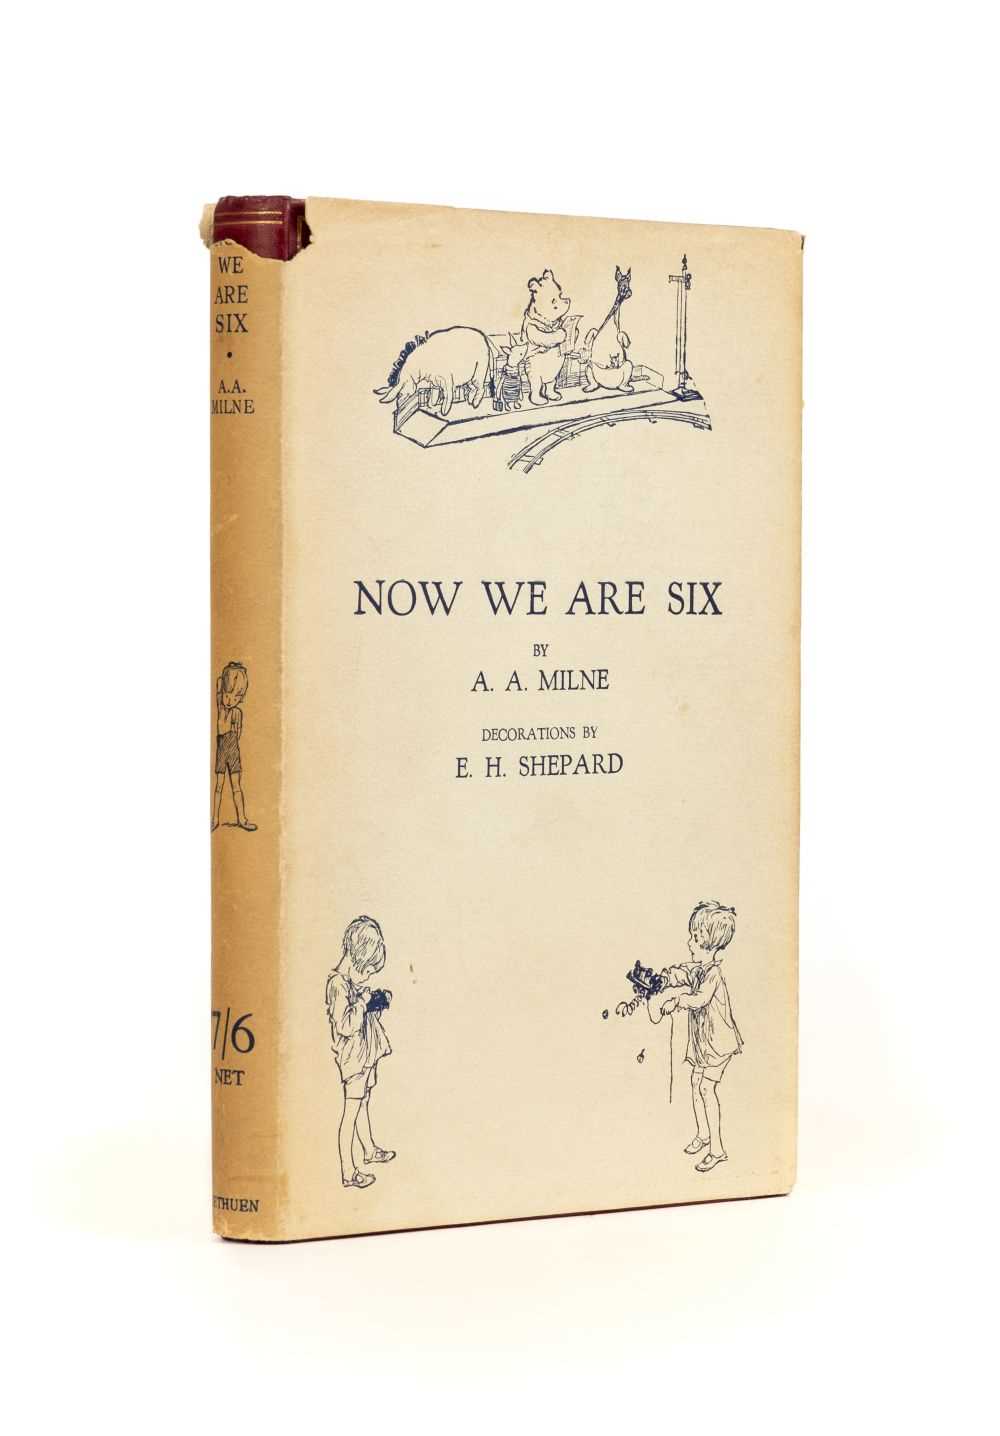 Lot 635 - Milne (A. A.). Now We Are Six, with Decorations by Ernest H. Shepard, 1927